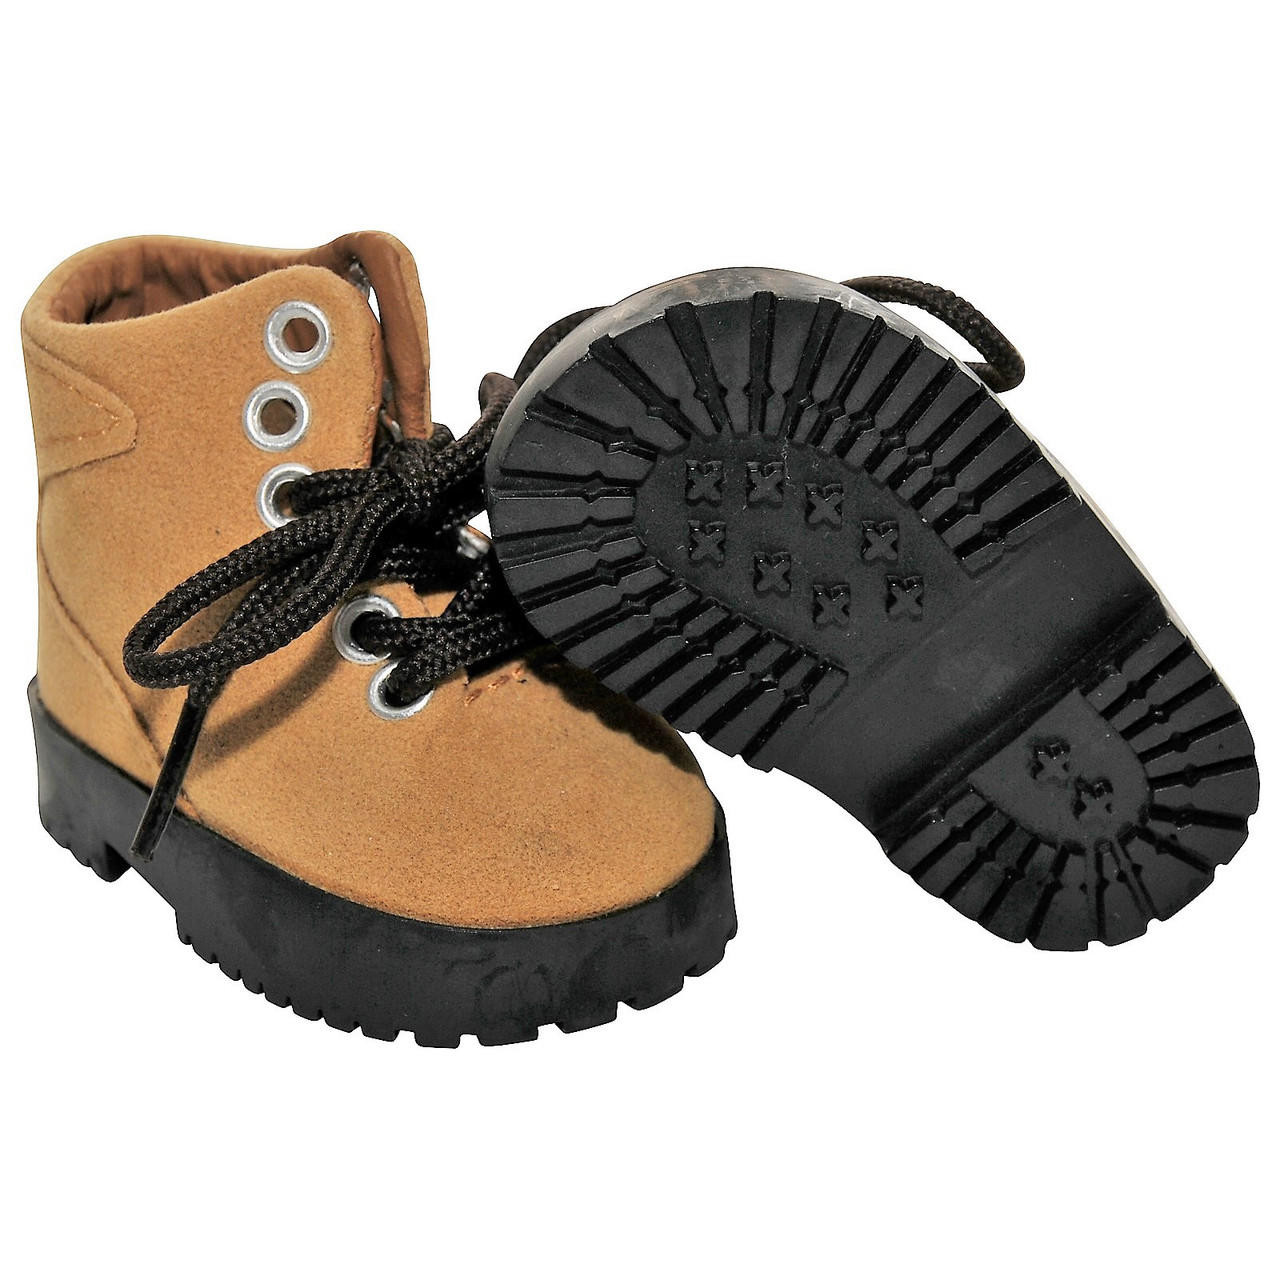 Authentic Hiking Boots with Shoe Box for 18 Inch Dolls